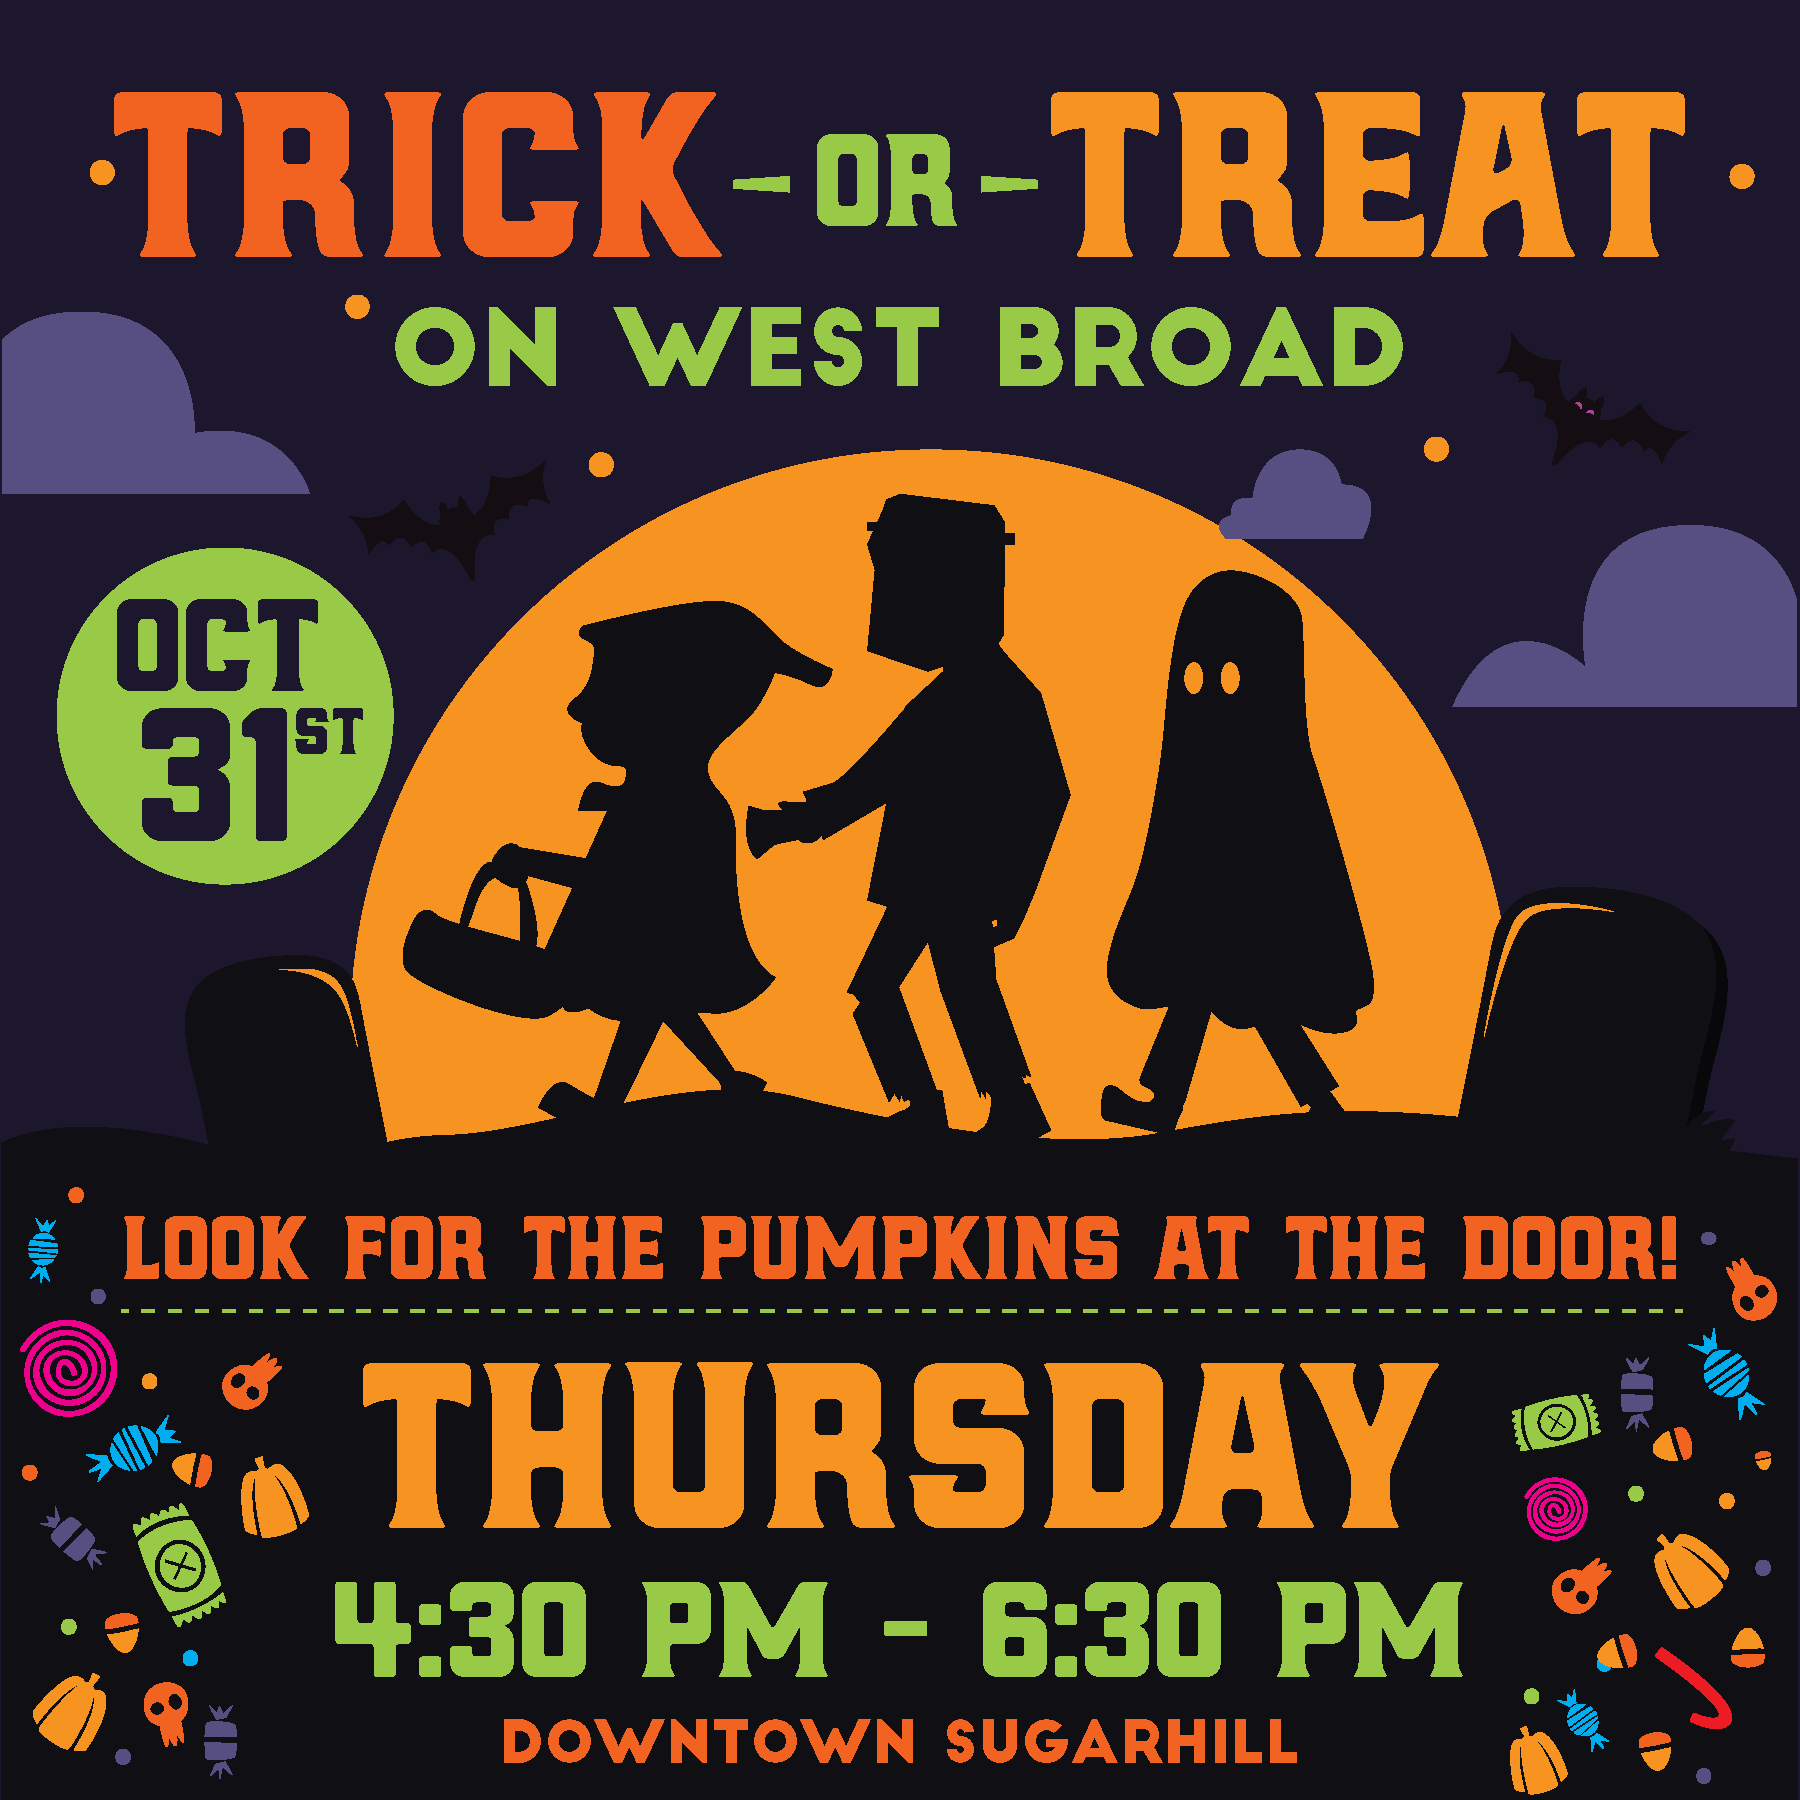 derry township trick or treat 2019